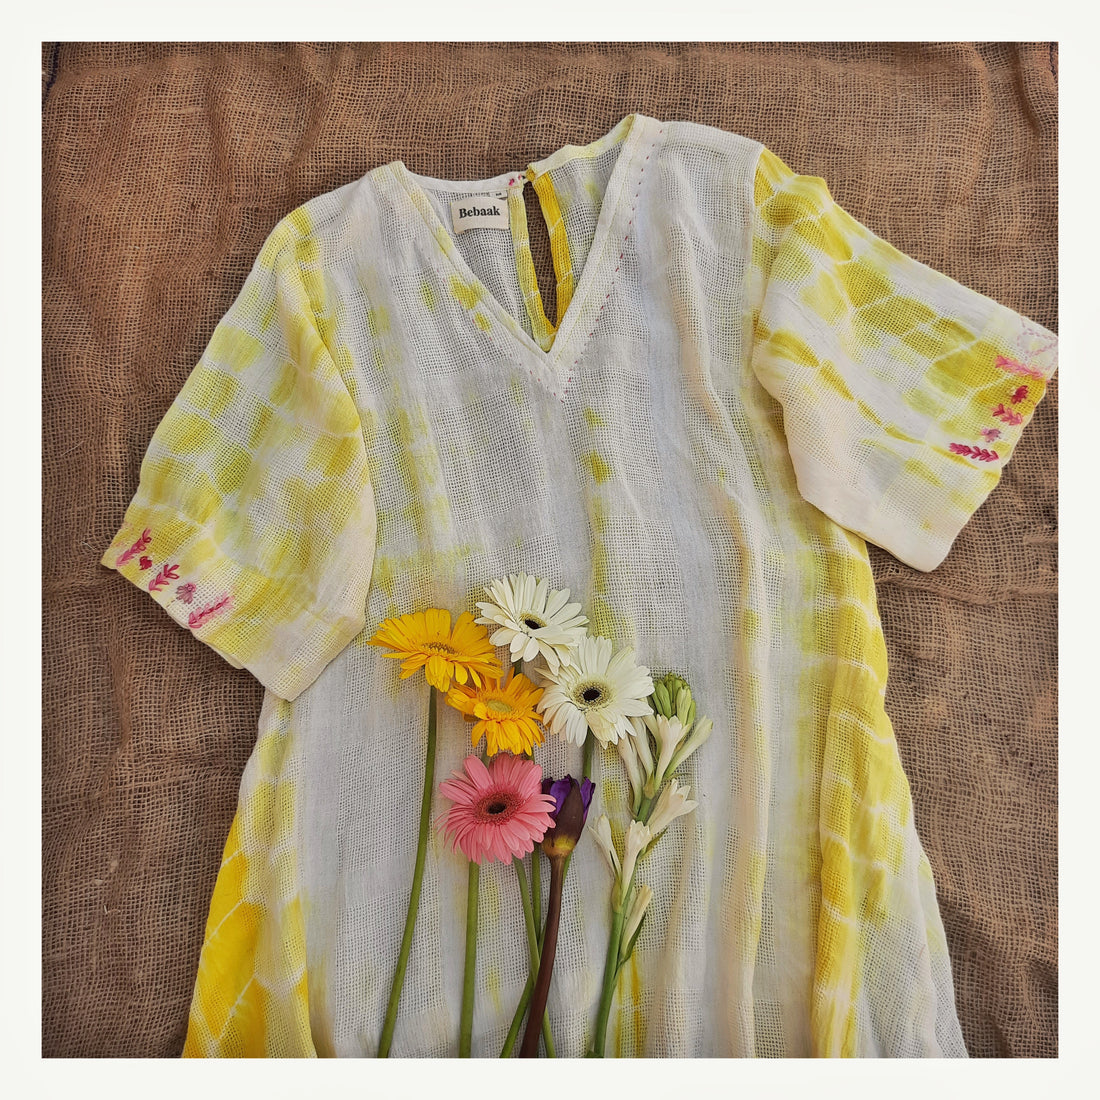 Summer with Daisy: Splash of colors, weaves & embroidery in your wardrobe